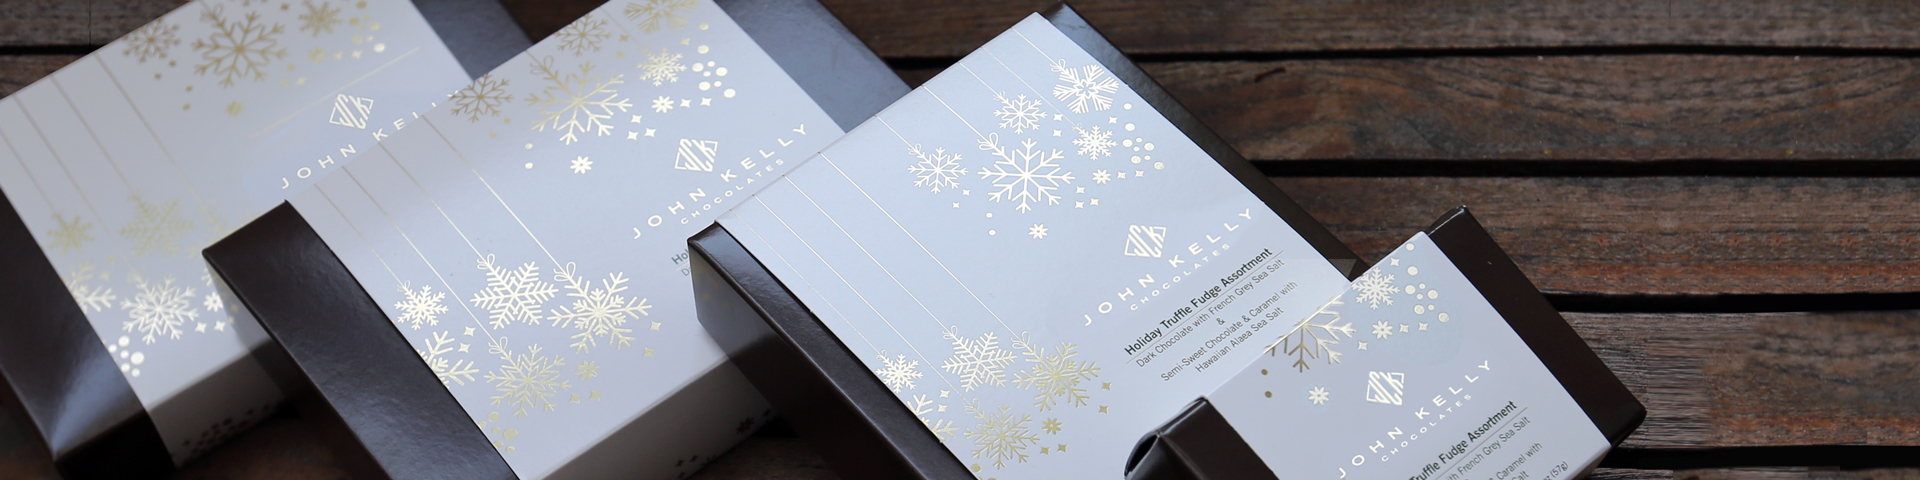 Four holiday boxes leaning against each other. Each box has a white sleeve with gold snowflakes on it.